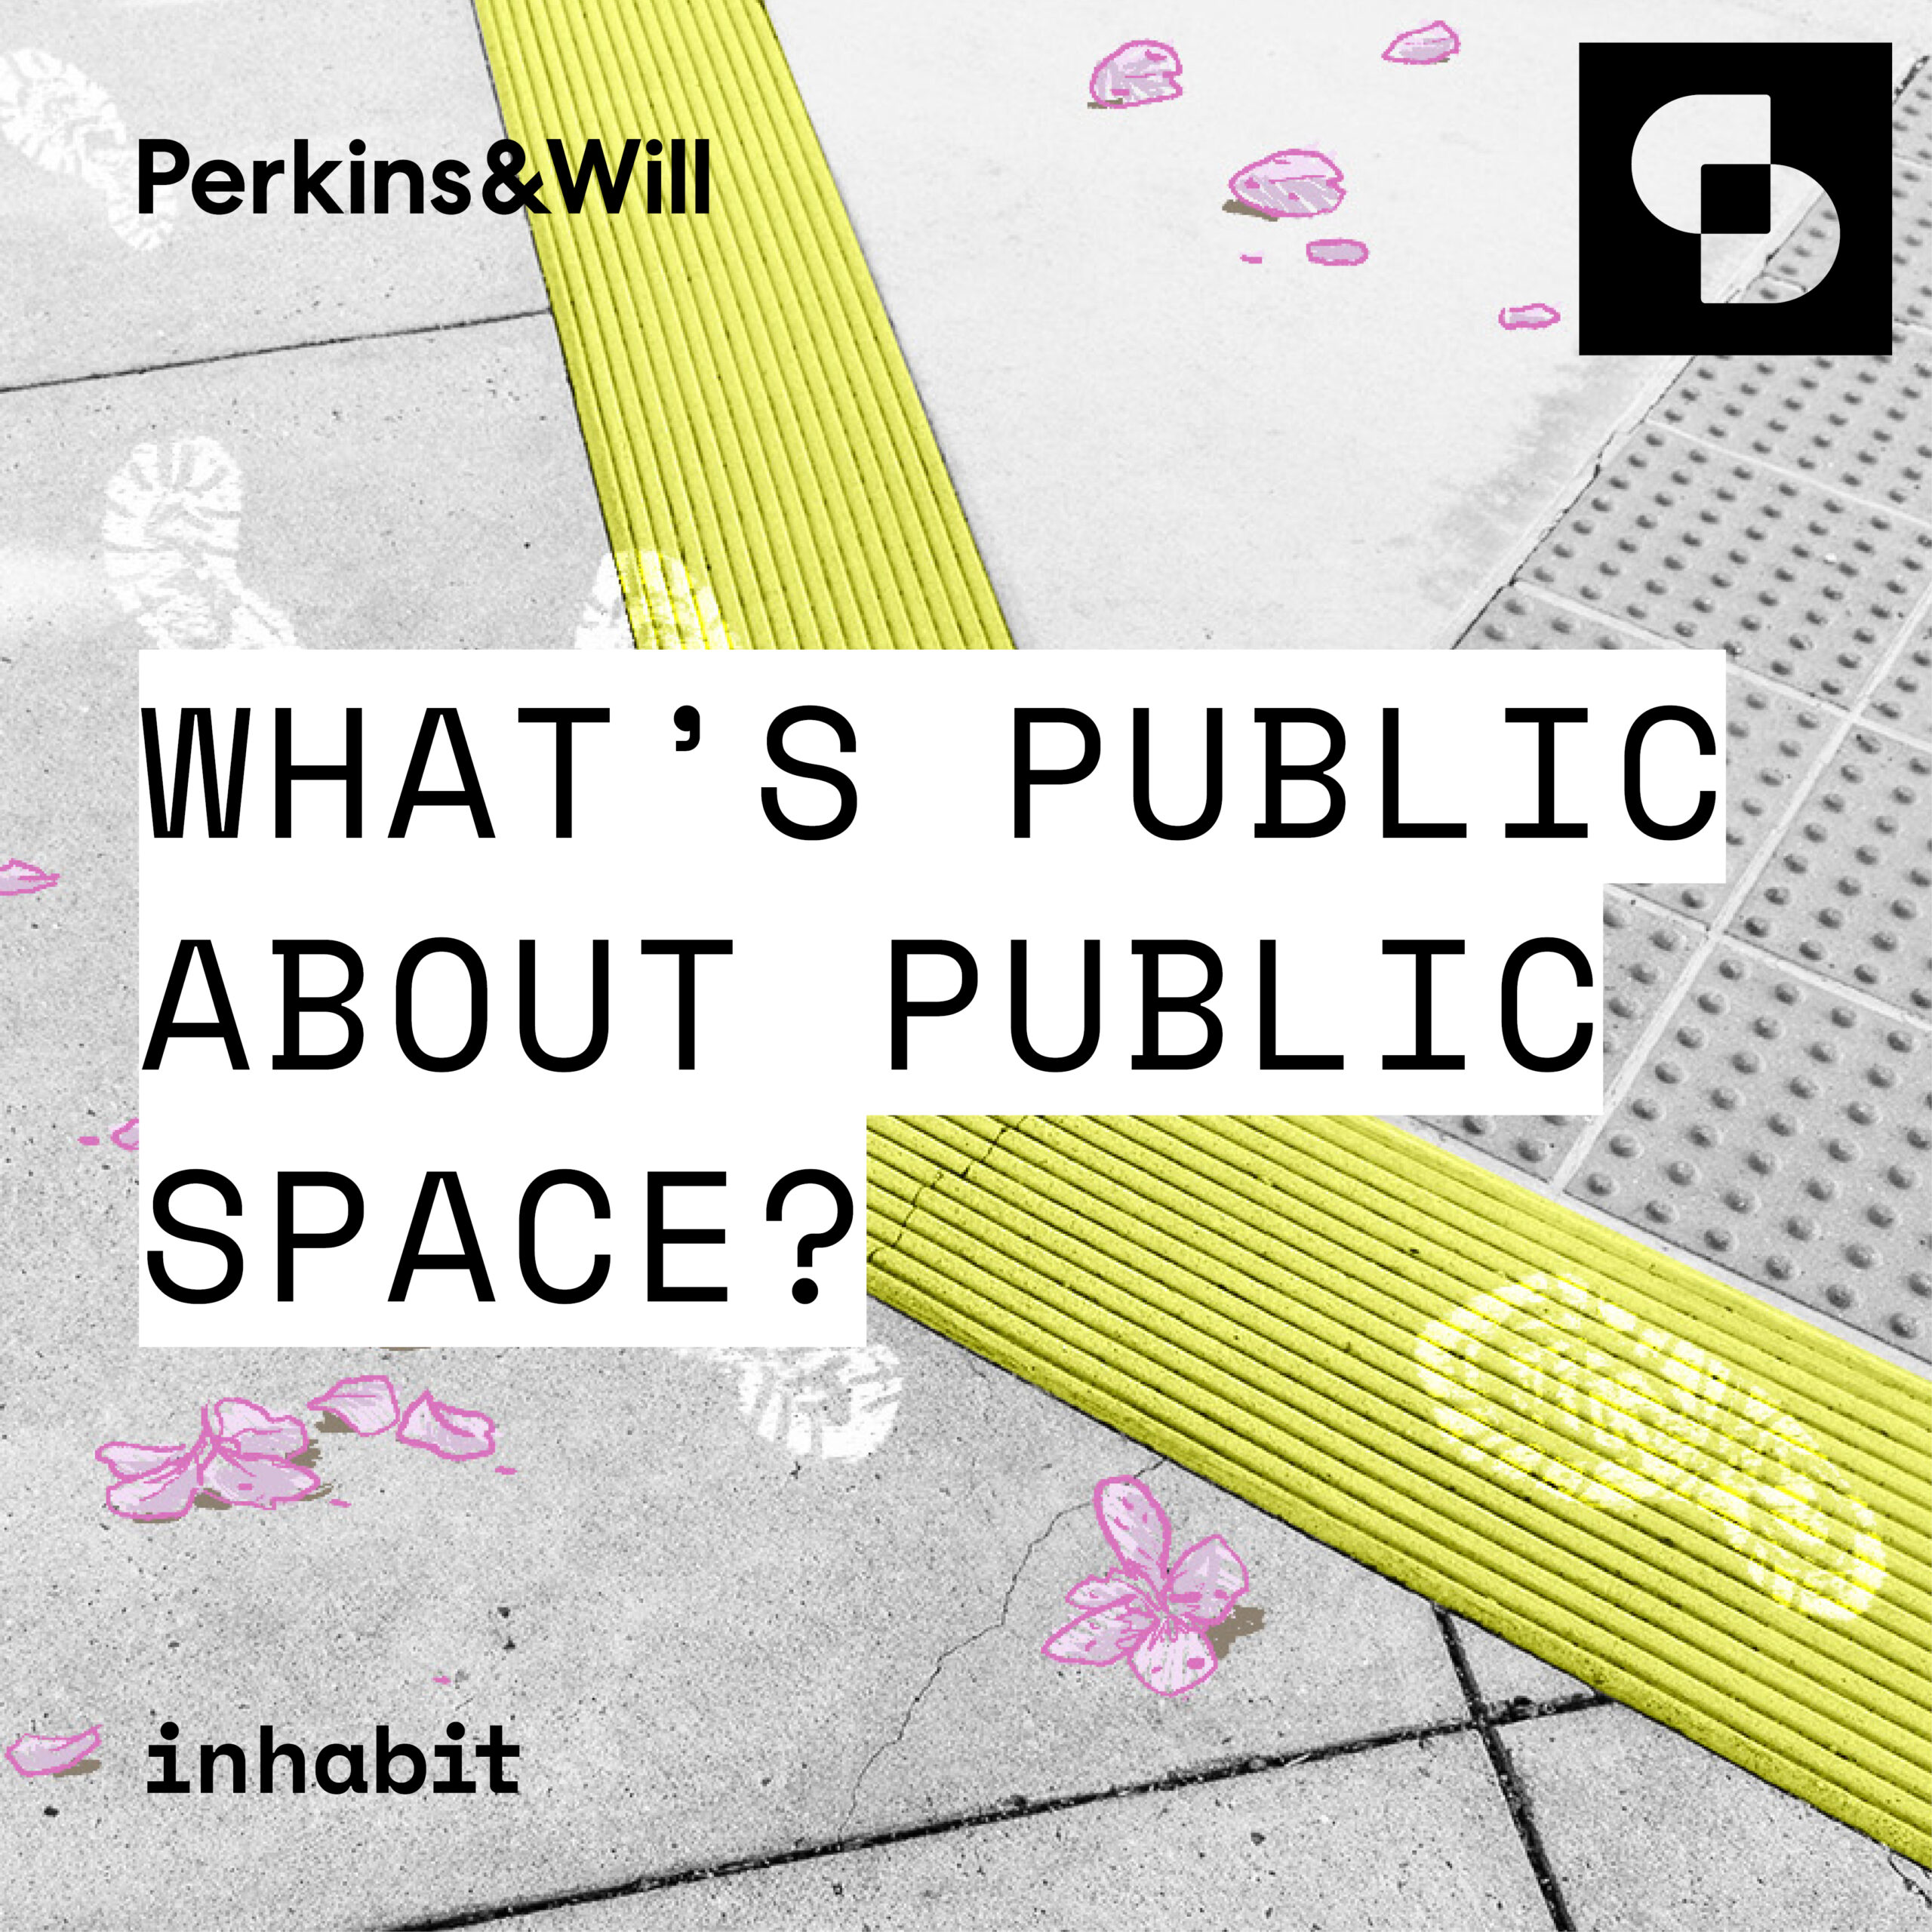 Inhabit's episode cover artwork for the 'What’s Public About Public Space?'